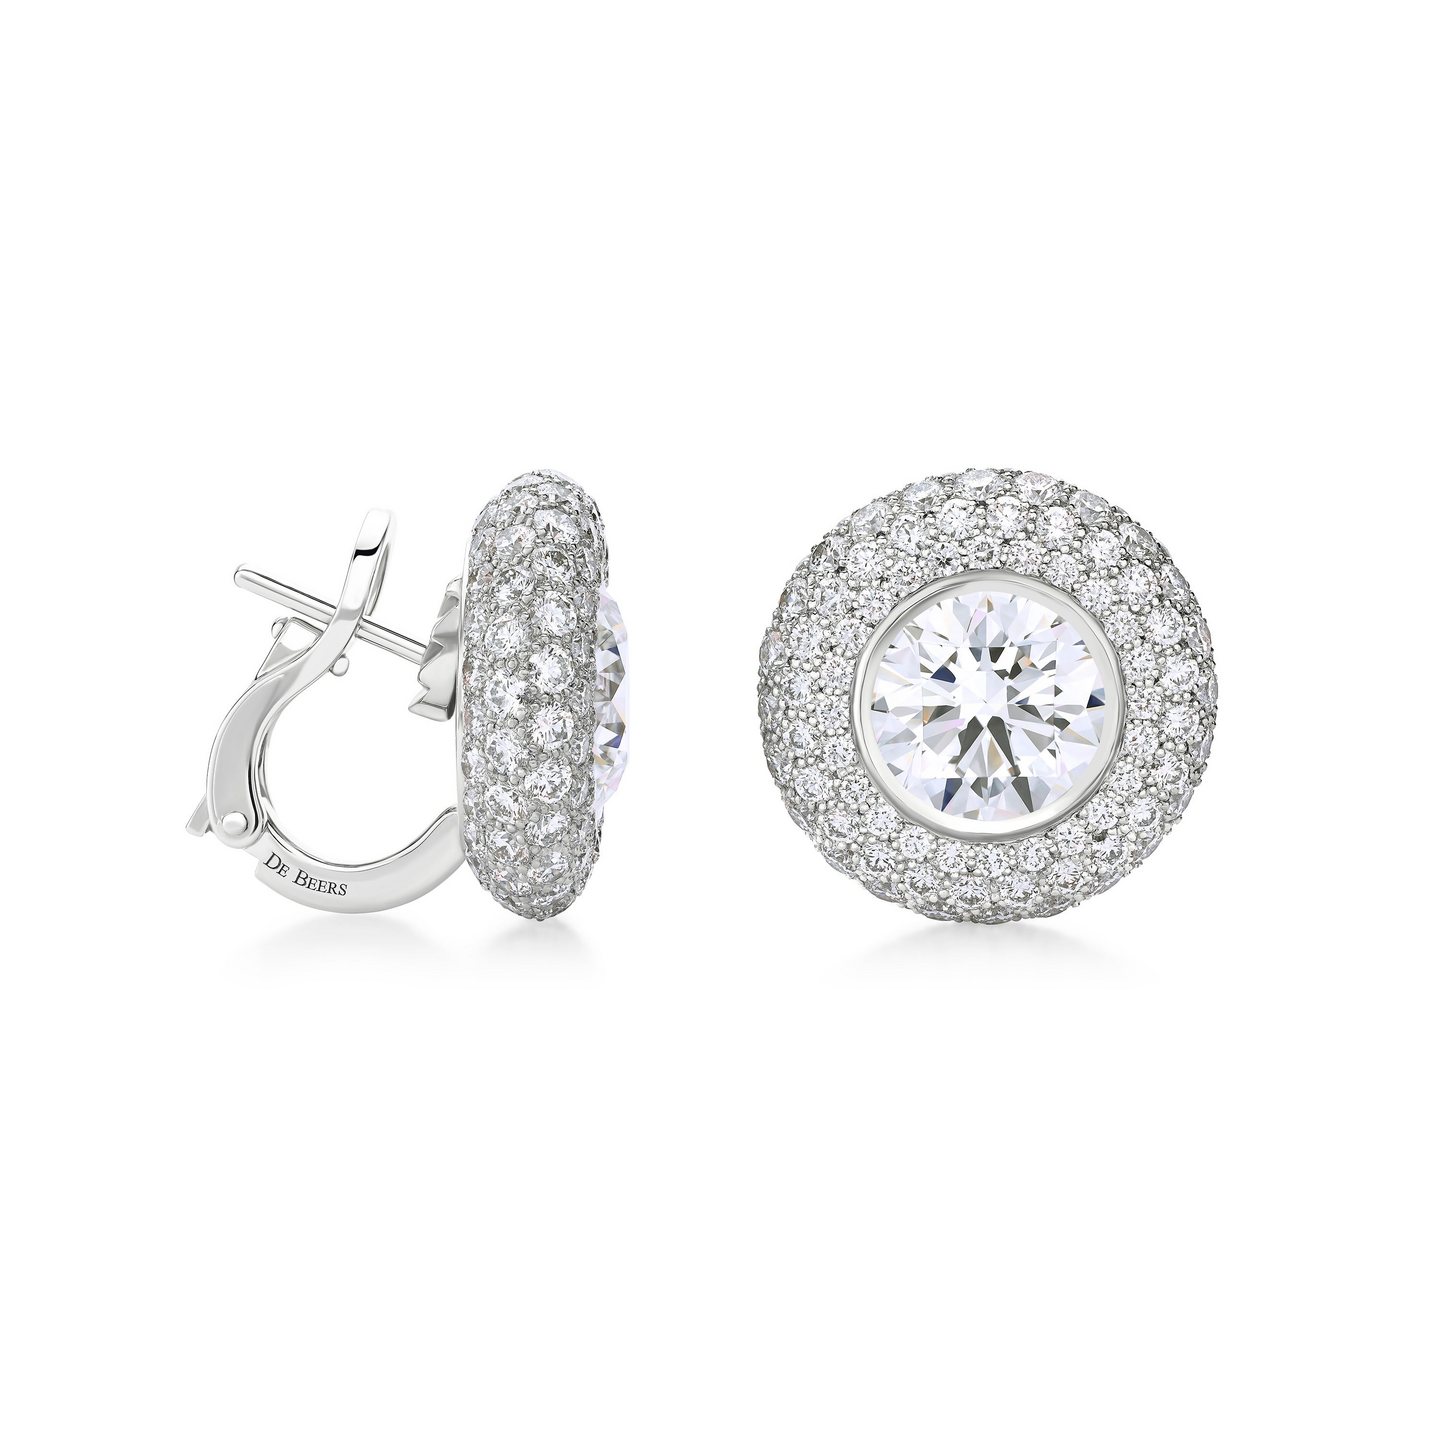 The Alchemist of Light Couture Collection at De Beers Jewellers